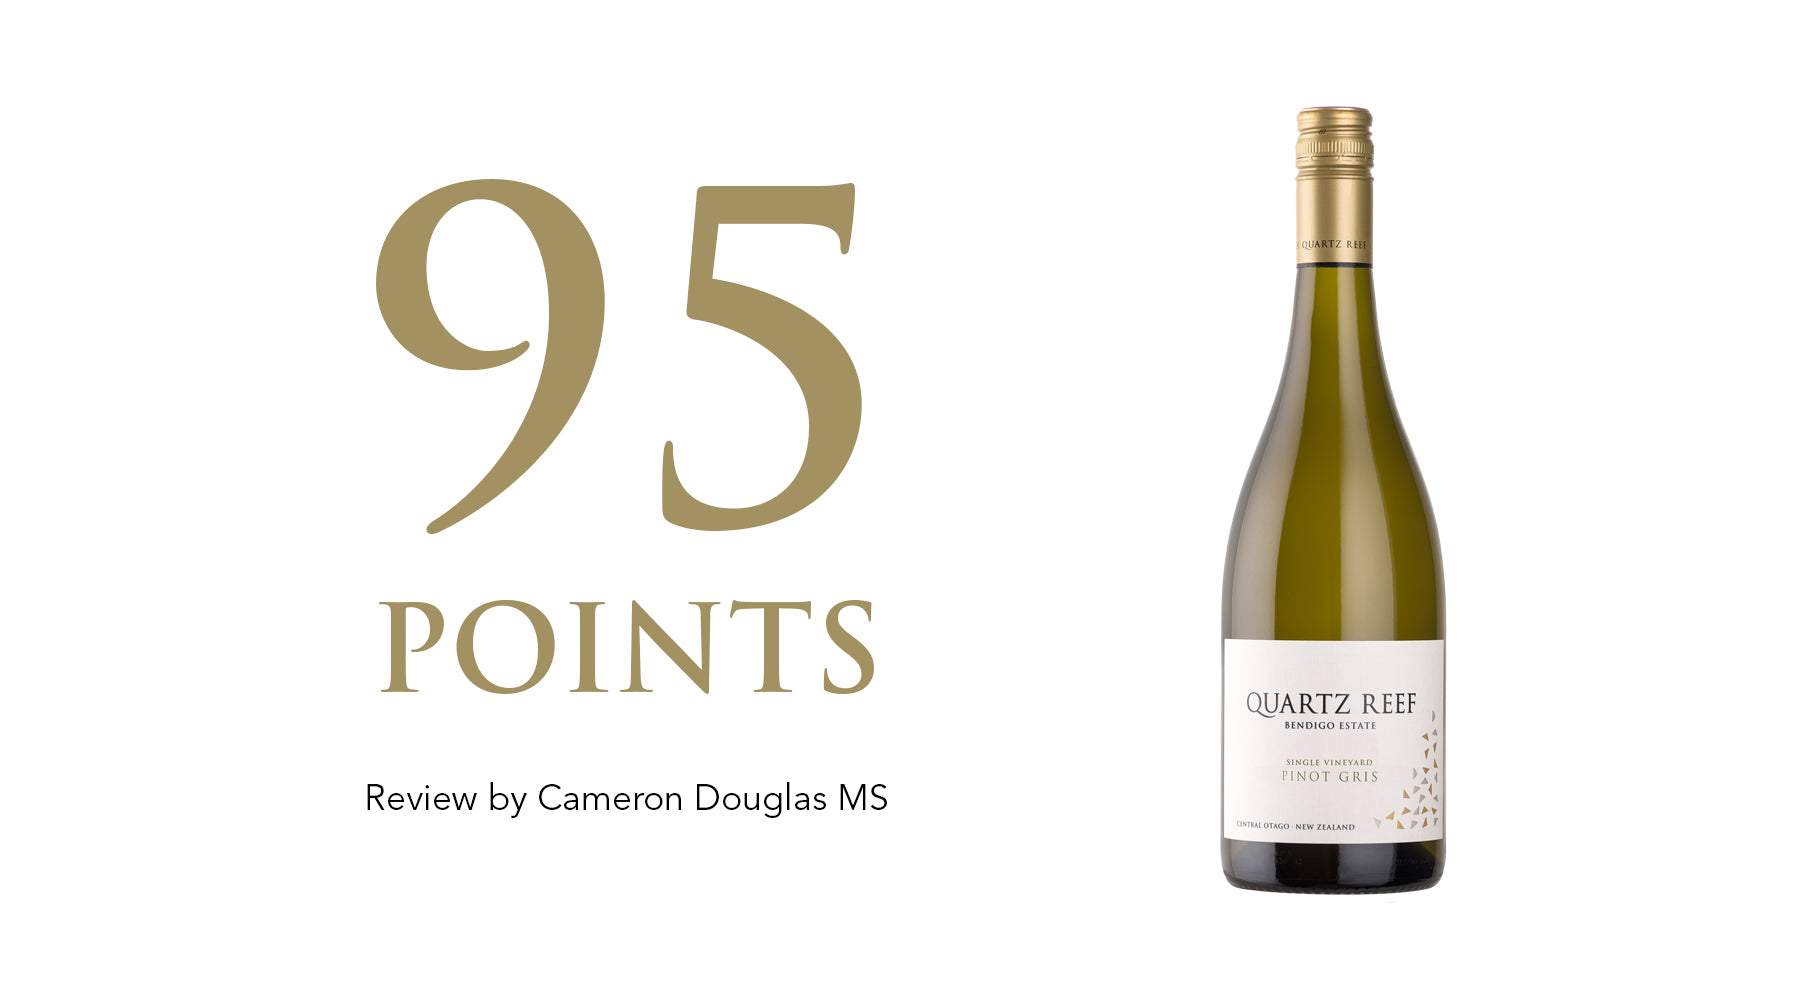 Pinot Gris 2019 - Awarded 95 Points